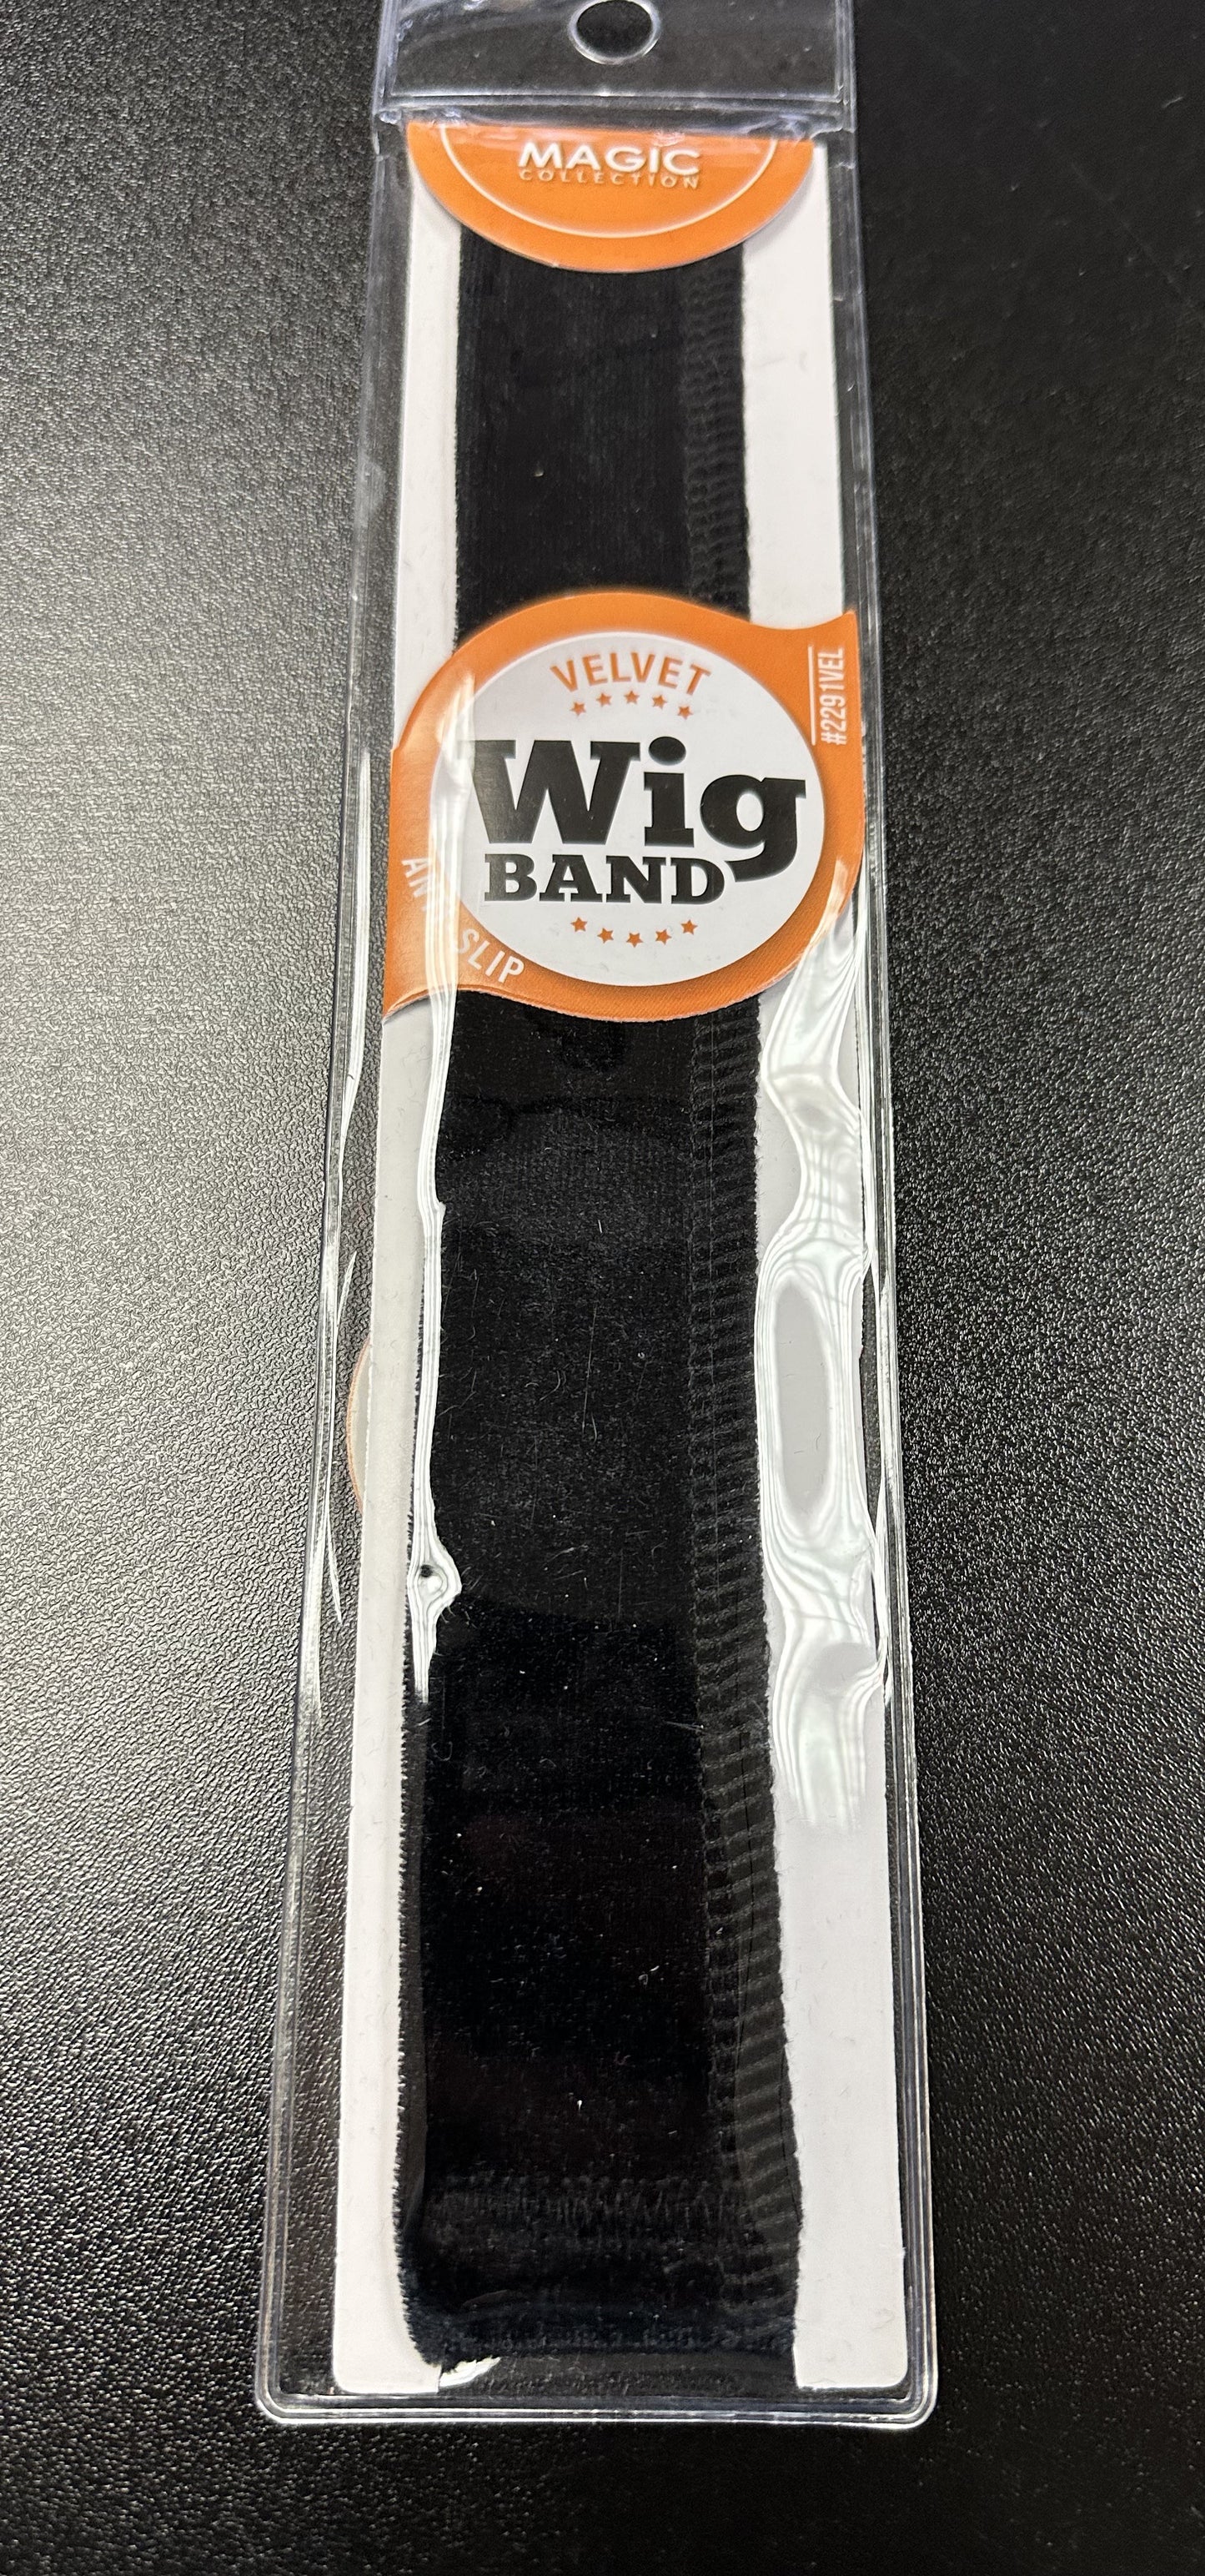 MAGIC COLLECTION VELVET WIG BAND